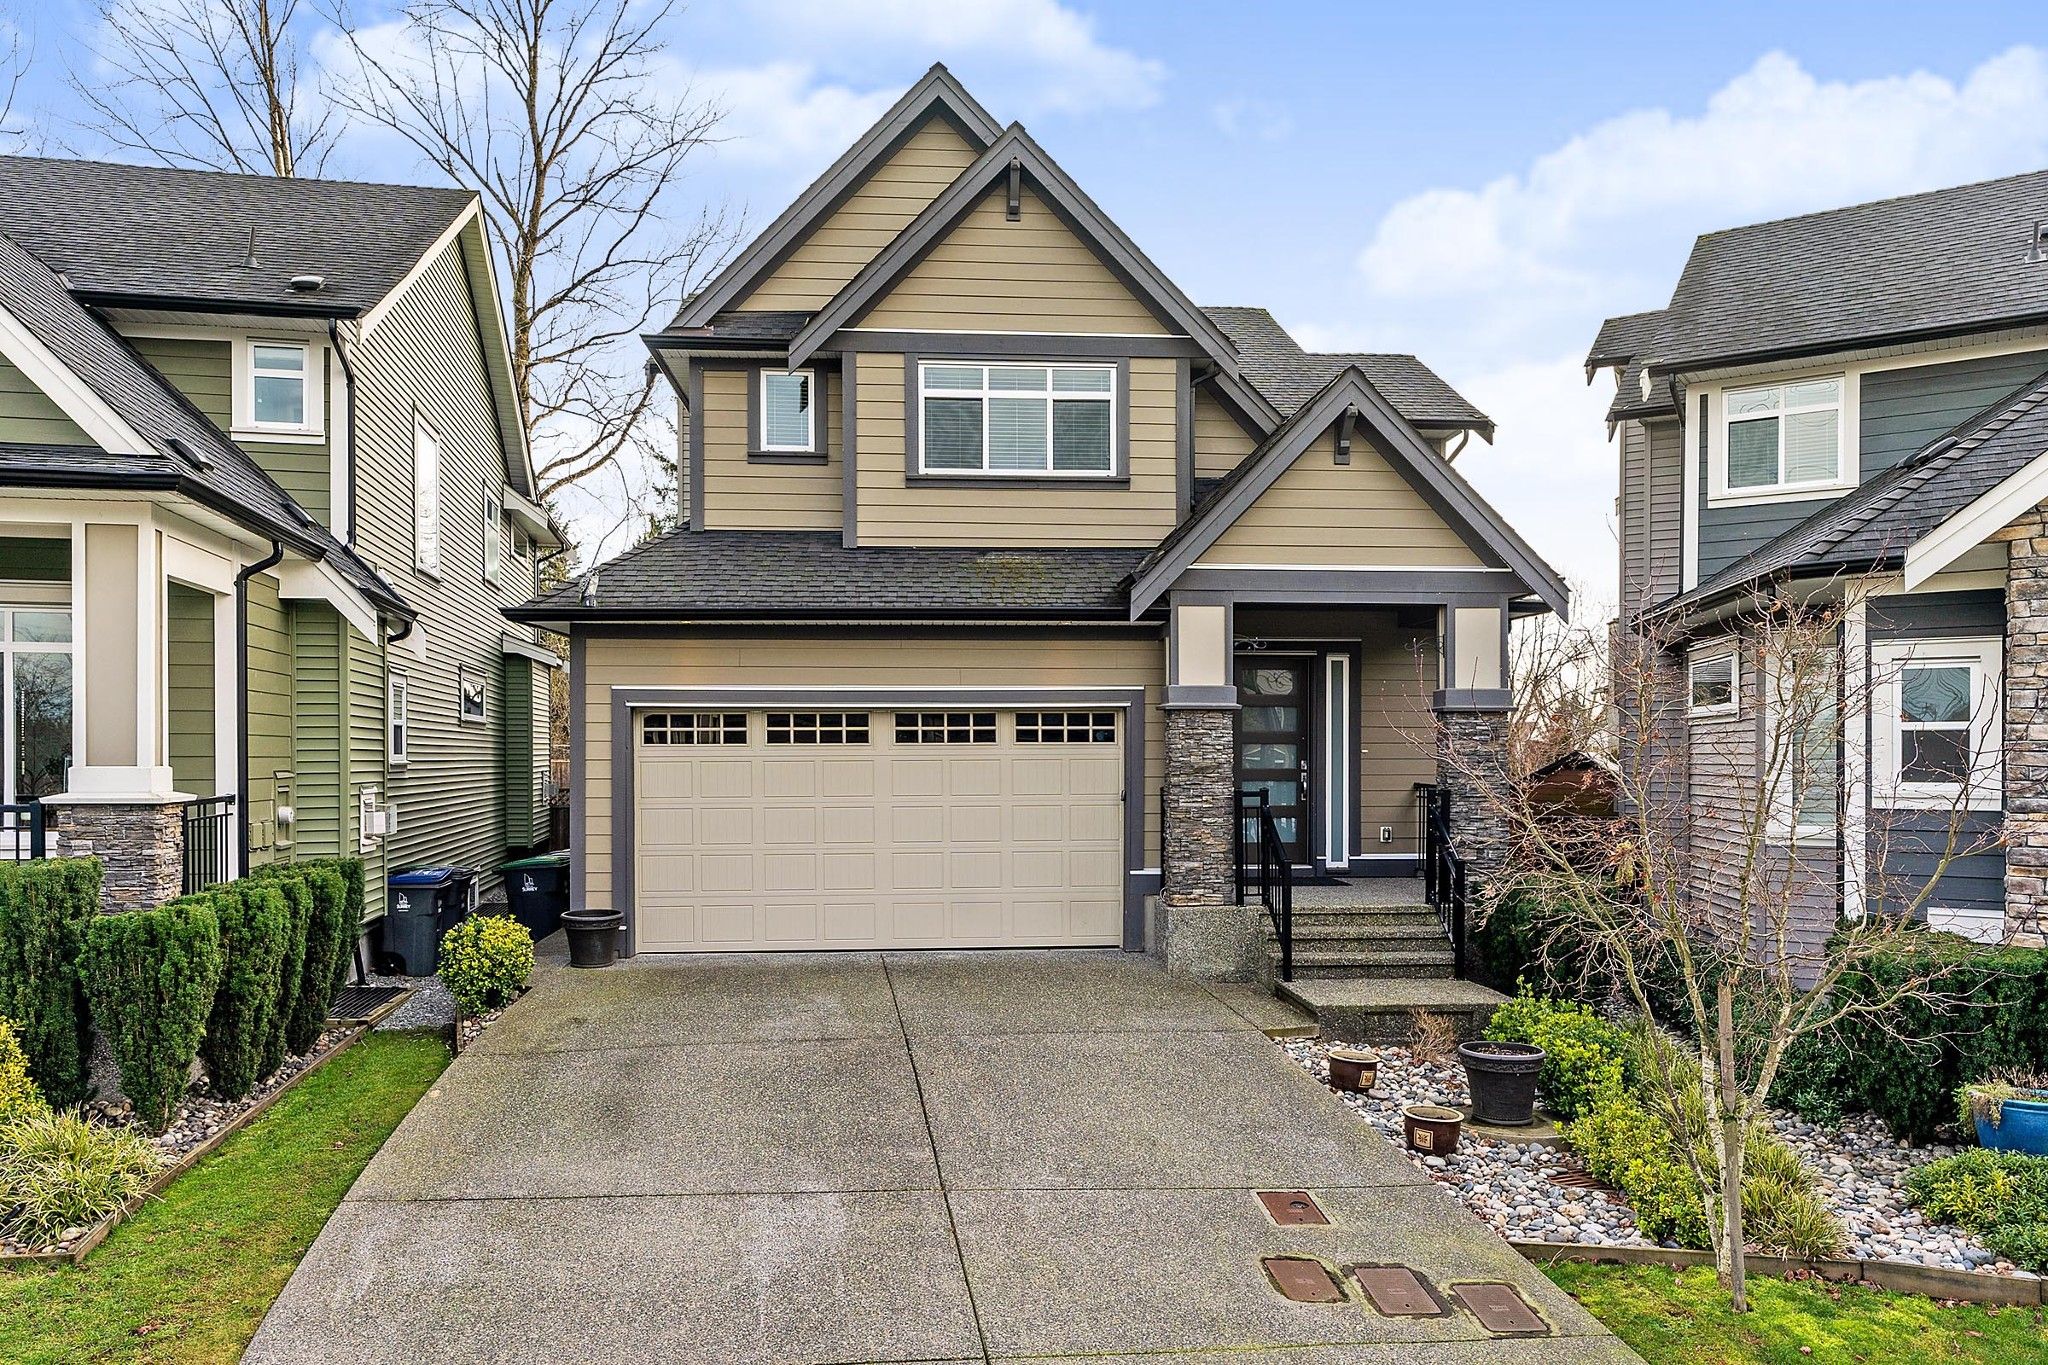 Main Photo: 18472 59 Avenue in Surrey: Cloverdale BC House for sale (Cloverdale)  : MLS®# R2428033